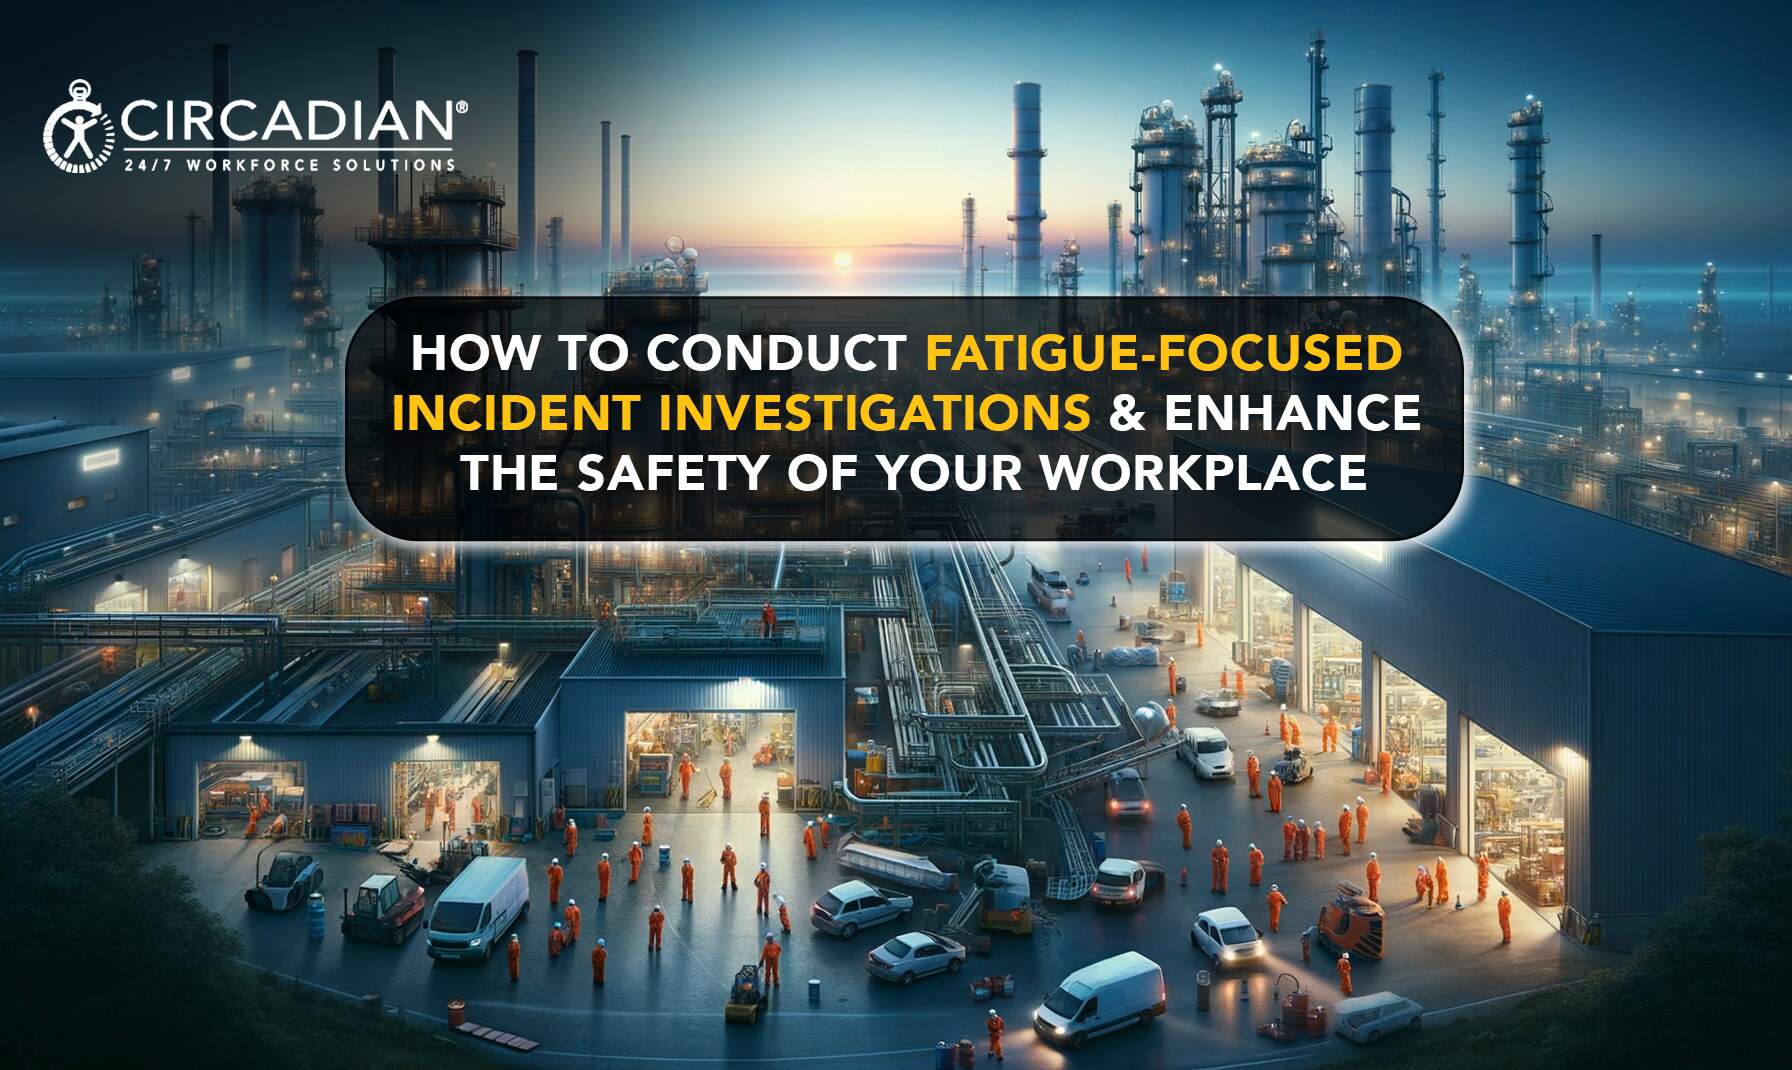 How to Conduct Fatigue-Focused Incident Investigations & Enhance the Safety of Your Workplace